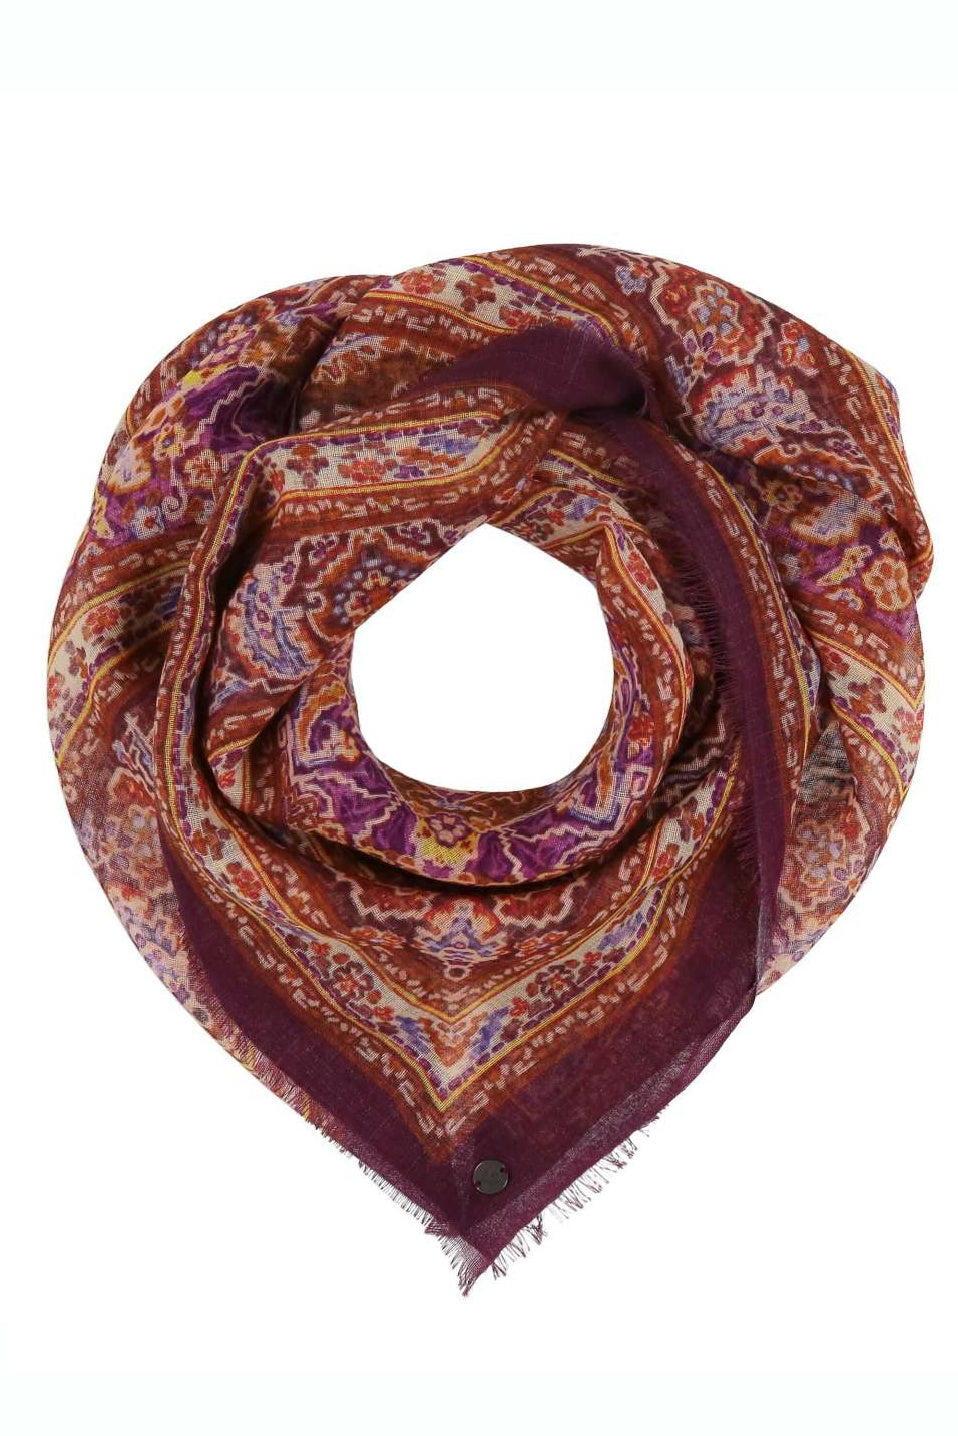 V. Frass Tapestry Wool Square Scarf